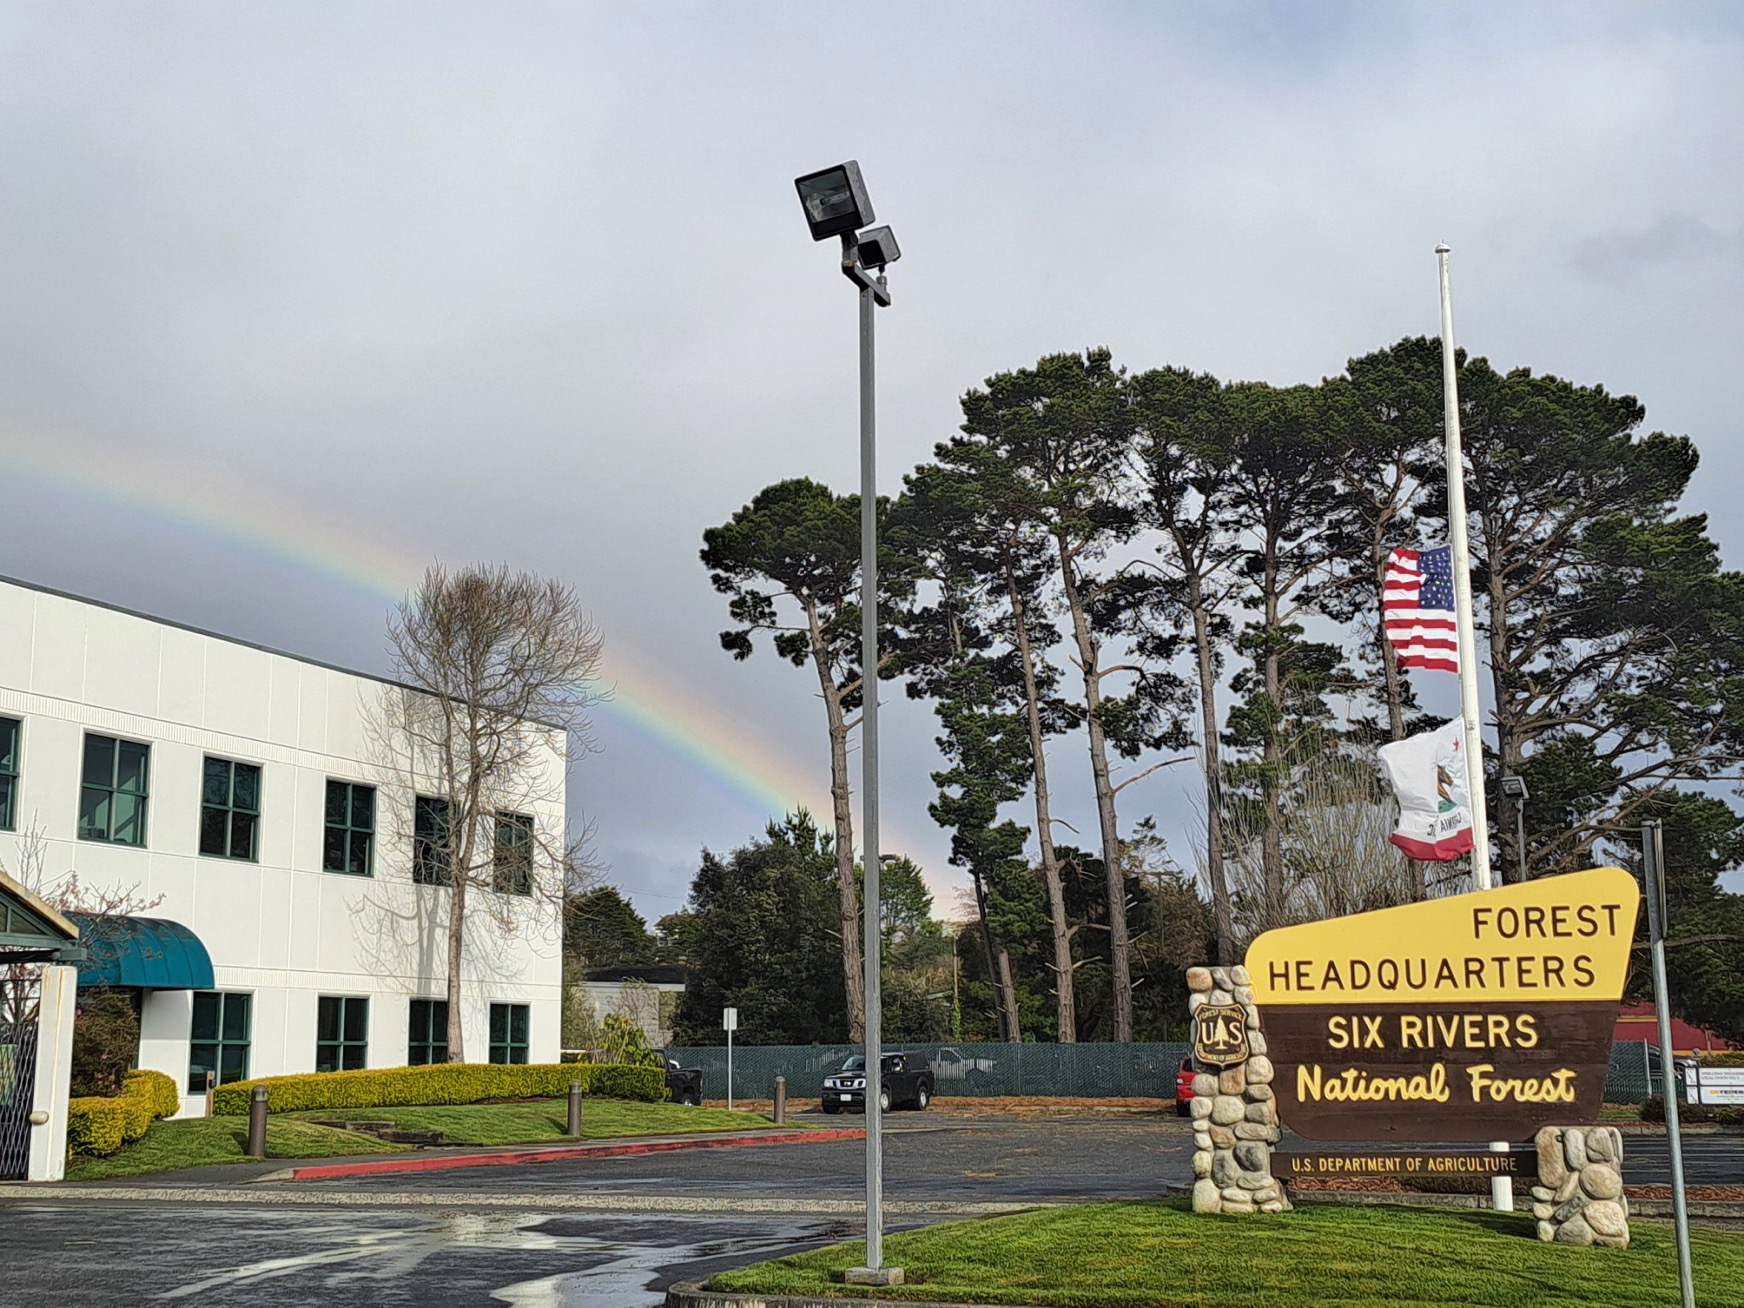 A picture of the sign and office of Six Rivers National Forest's Headquarters, a rainbow can be seen behind the office